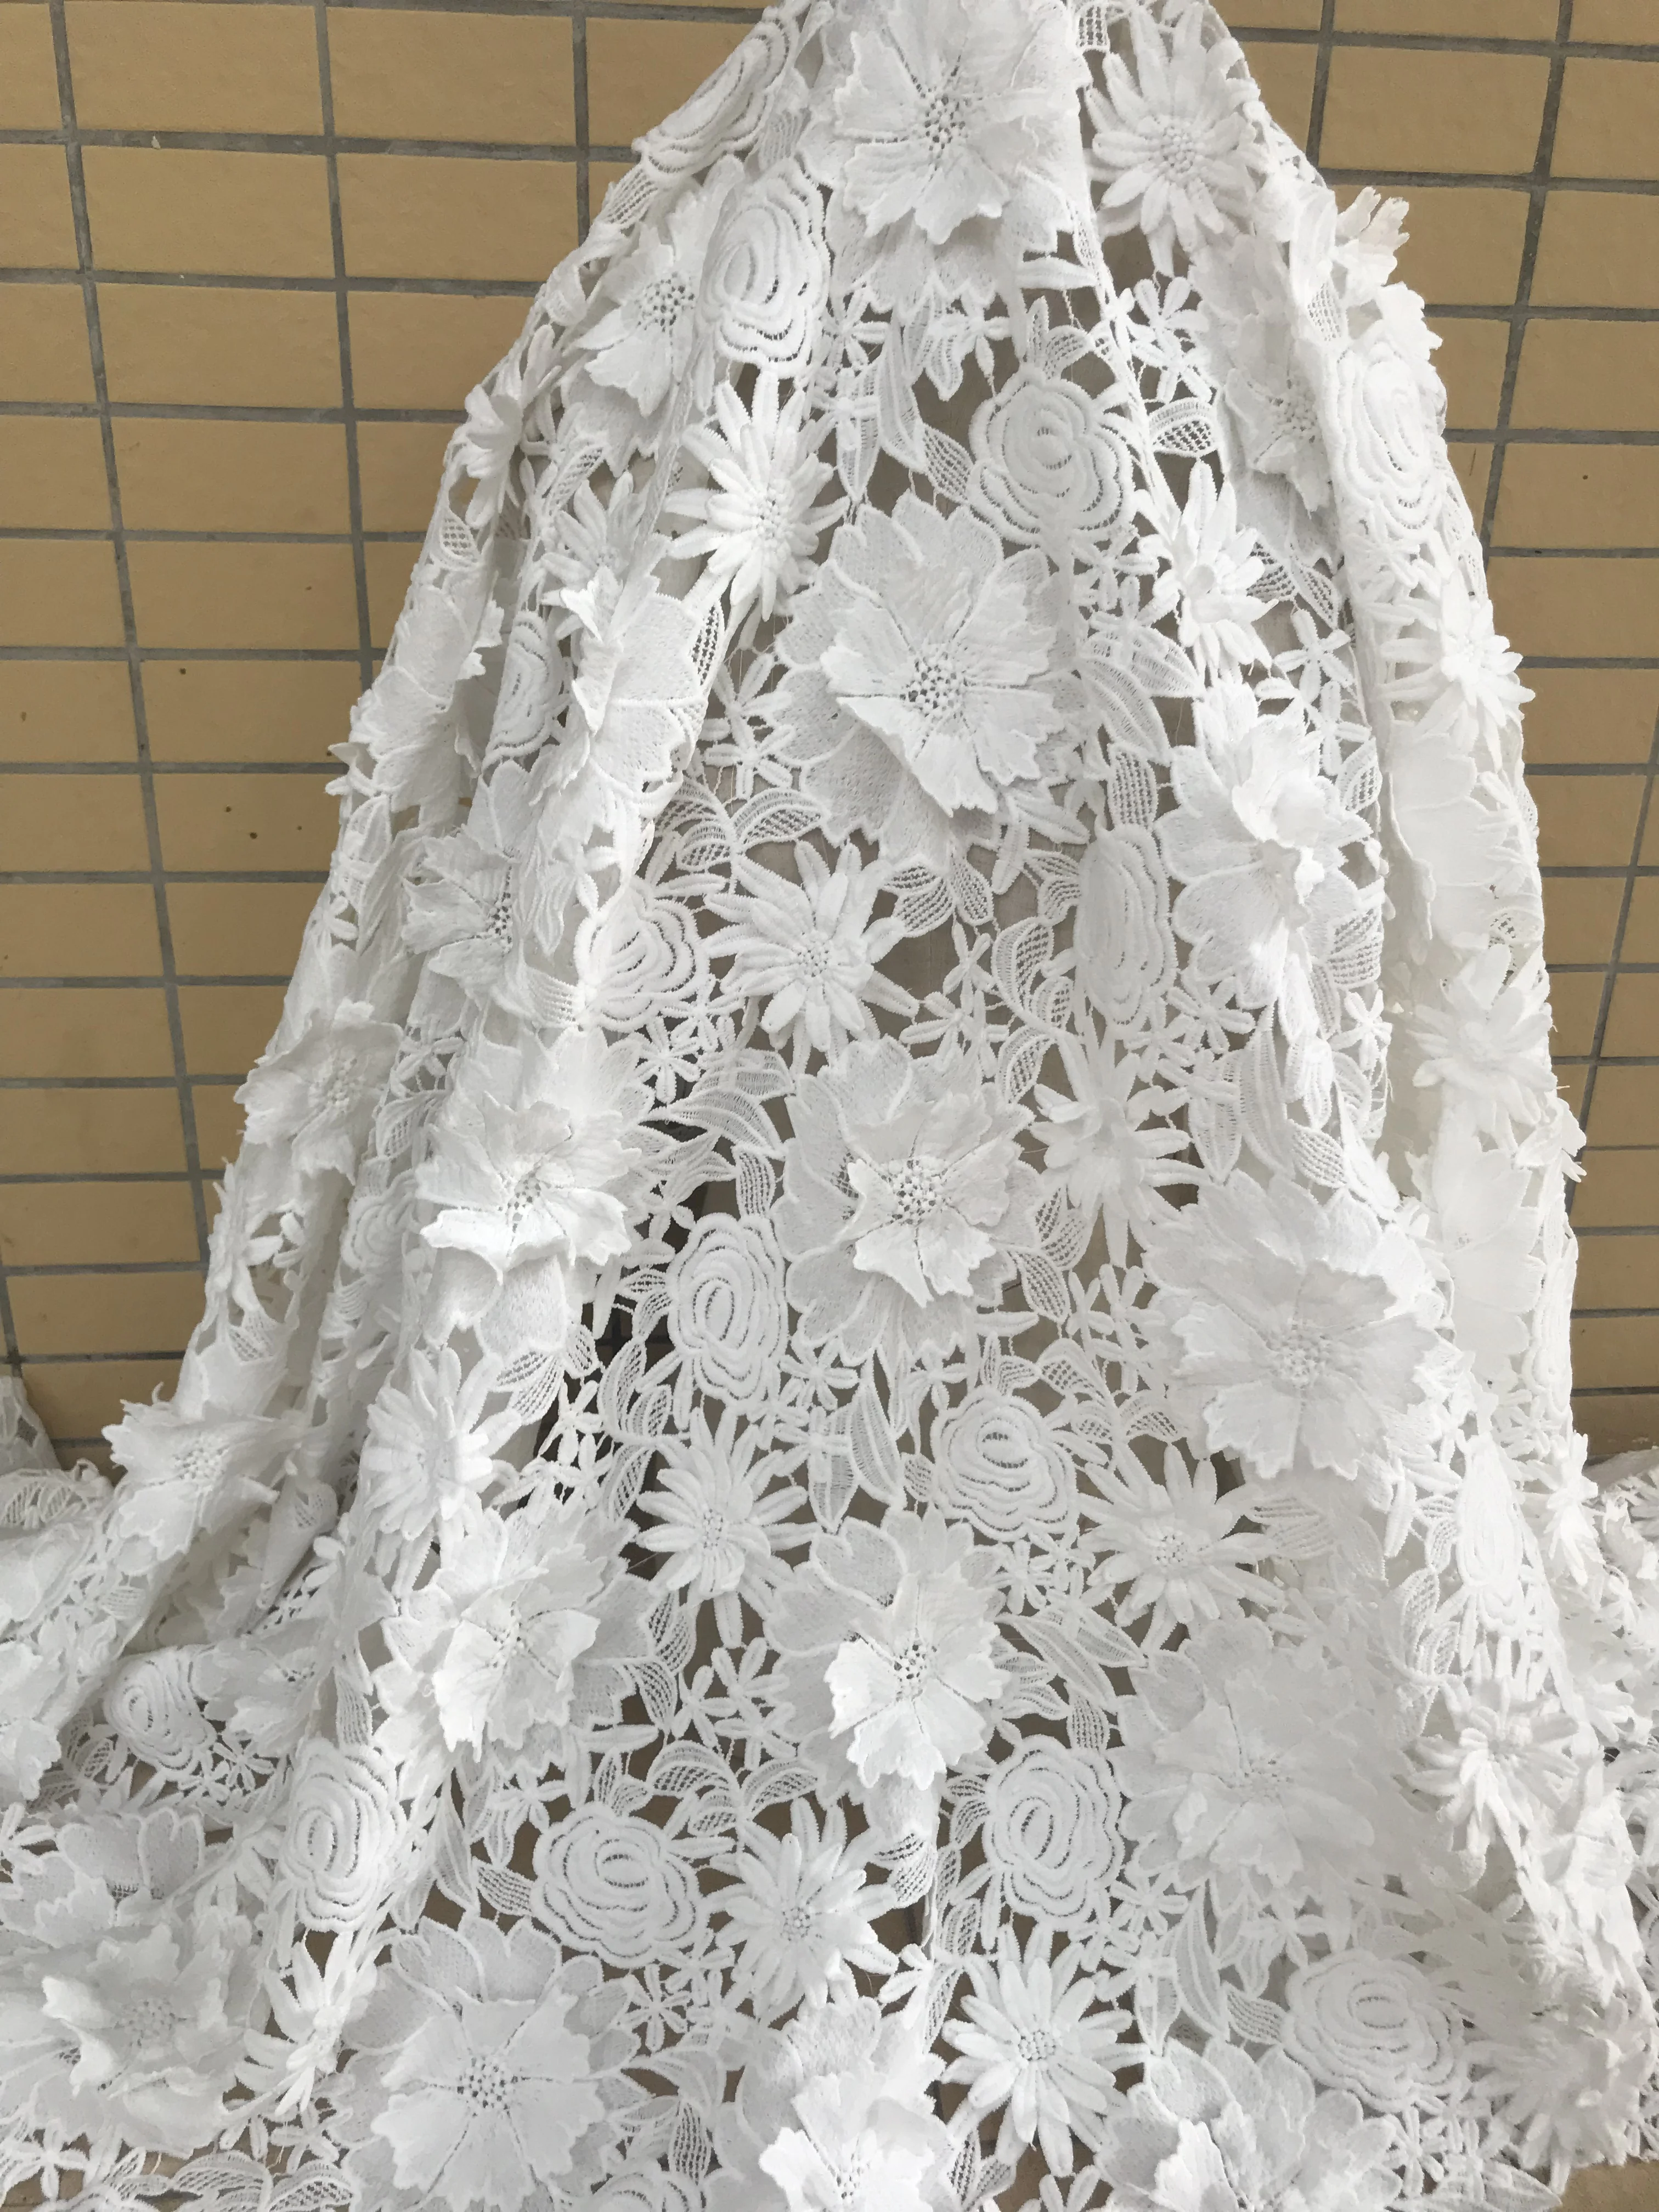 https://ae01.alicdn.com/kf/H716d361eda614b138df417317e2fb606X/sexy-french-net-with-ZH-58883-white-embroidery-mesh-tulle-lace-fabric-for-wedding-evening-dress.jpg